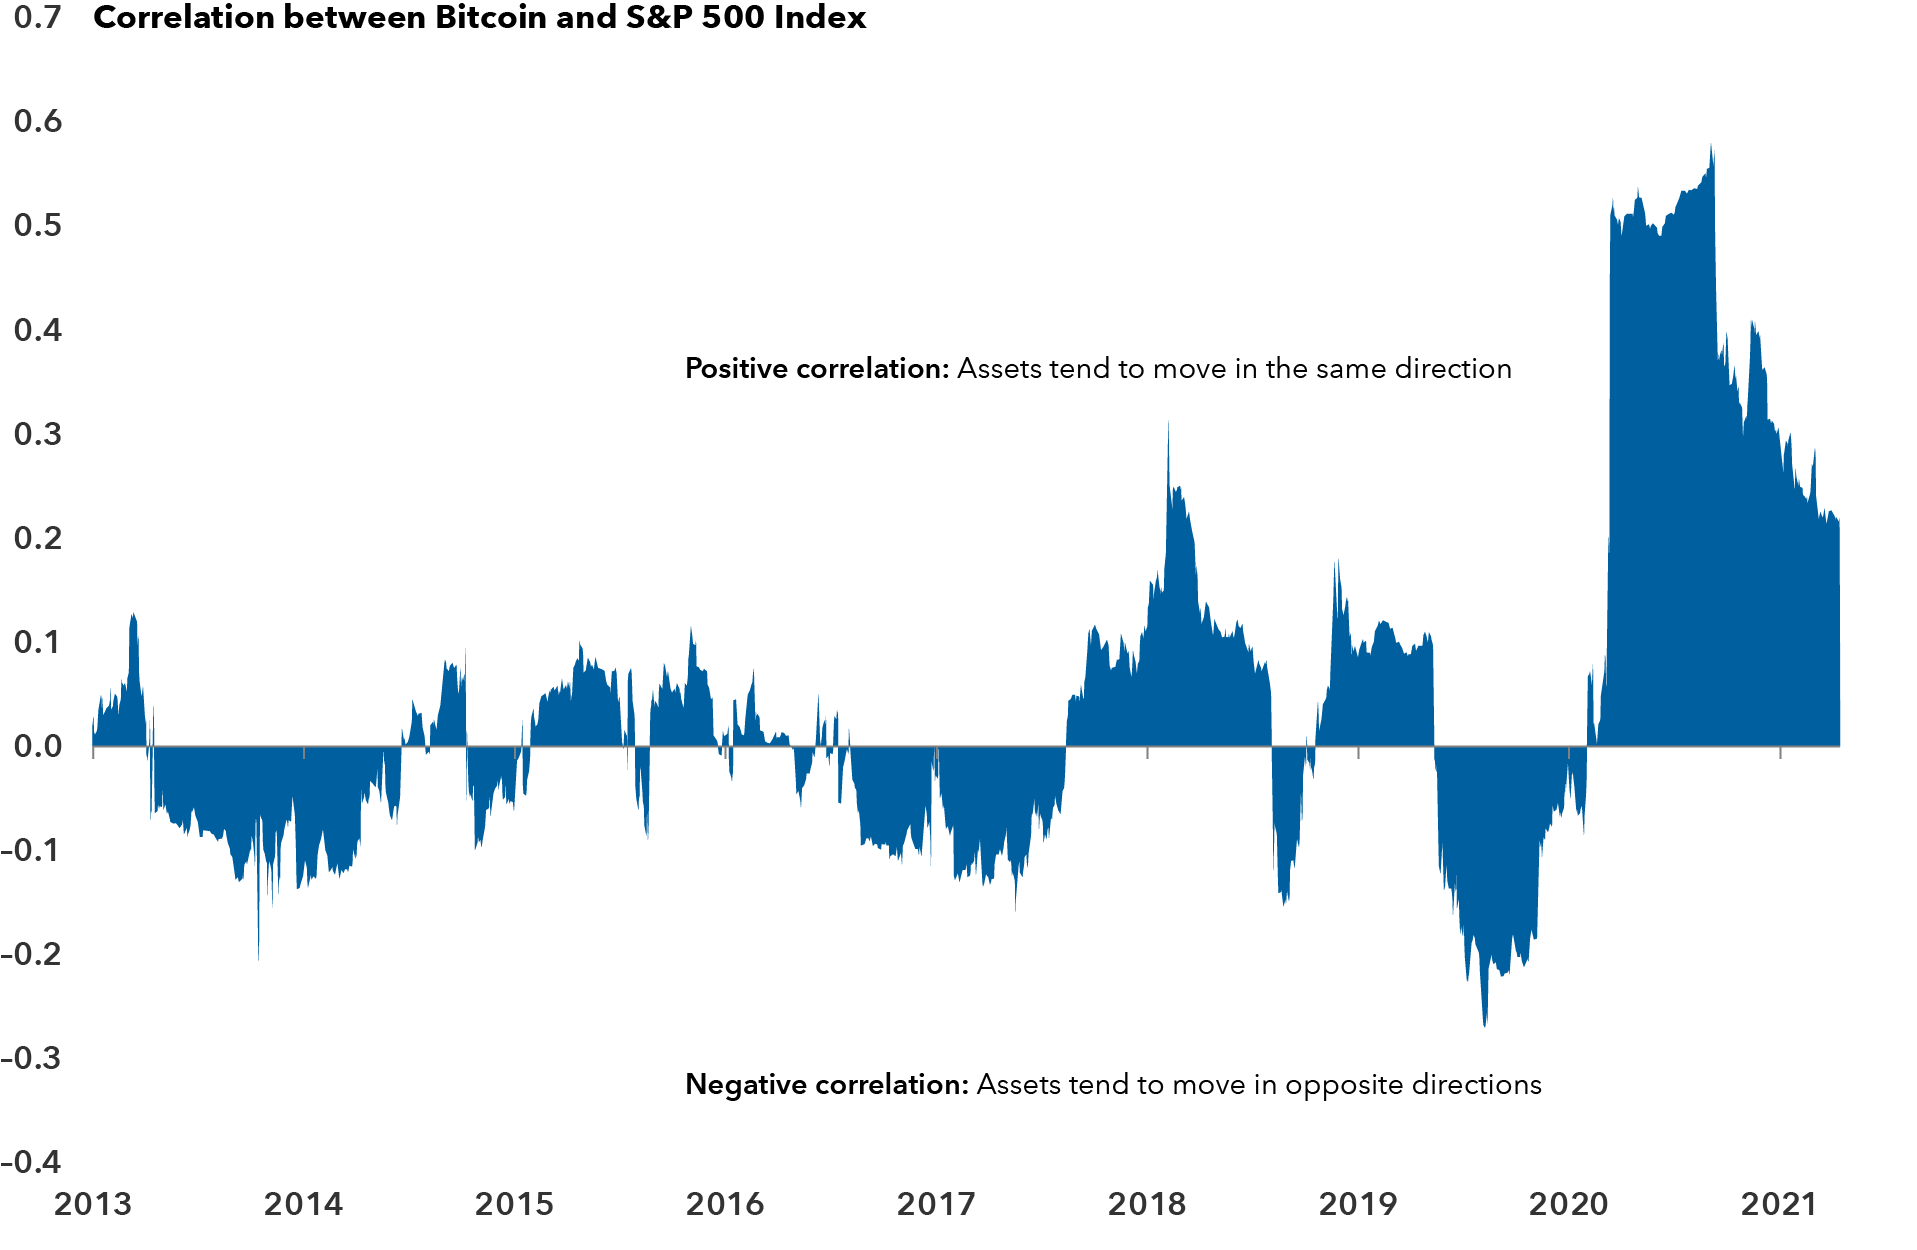 Bitcoin's correlation to U.S. equity markets spiked in 2020